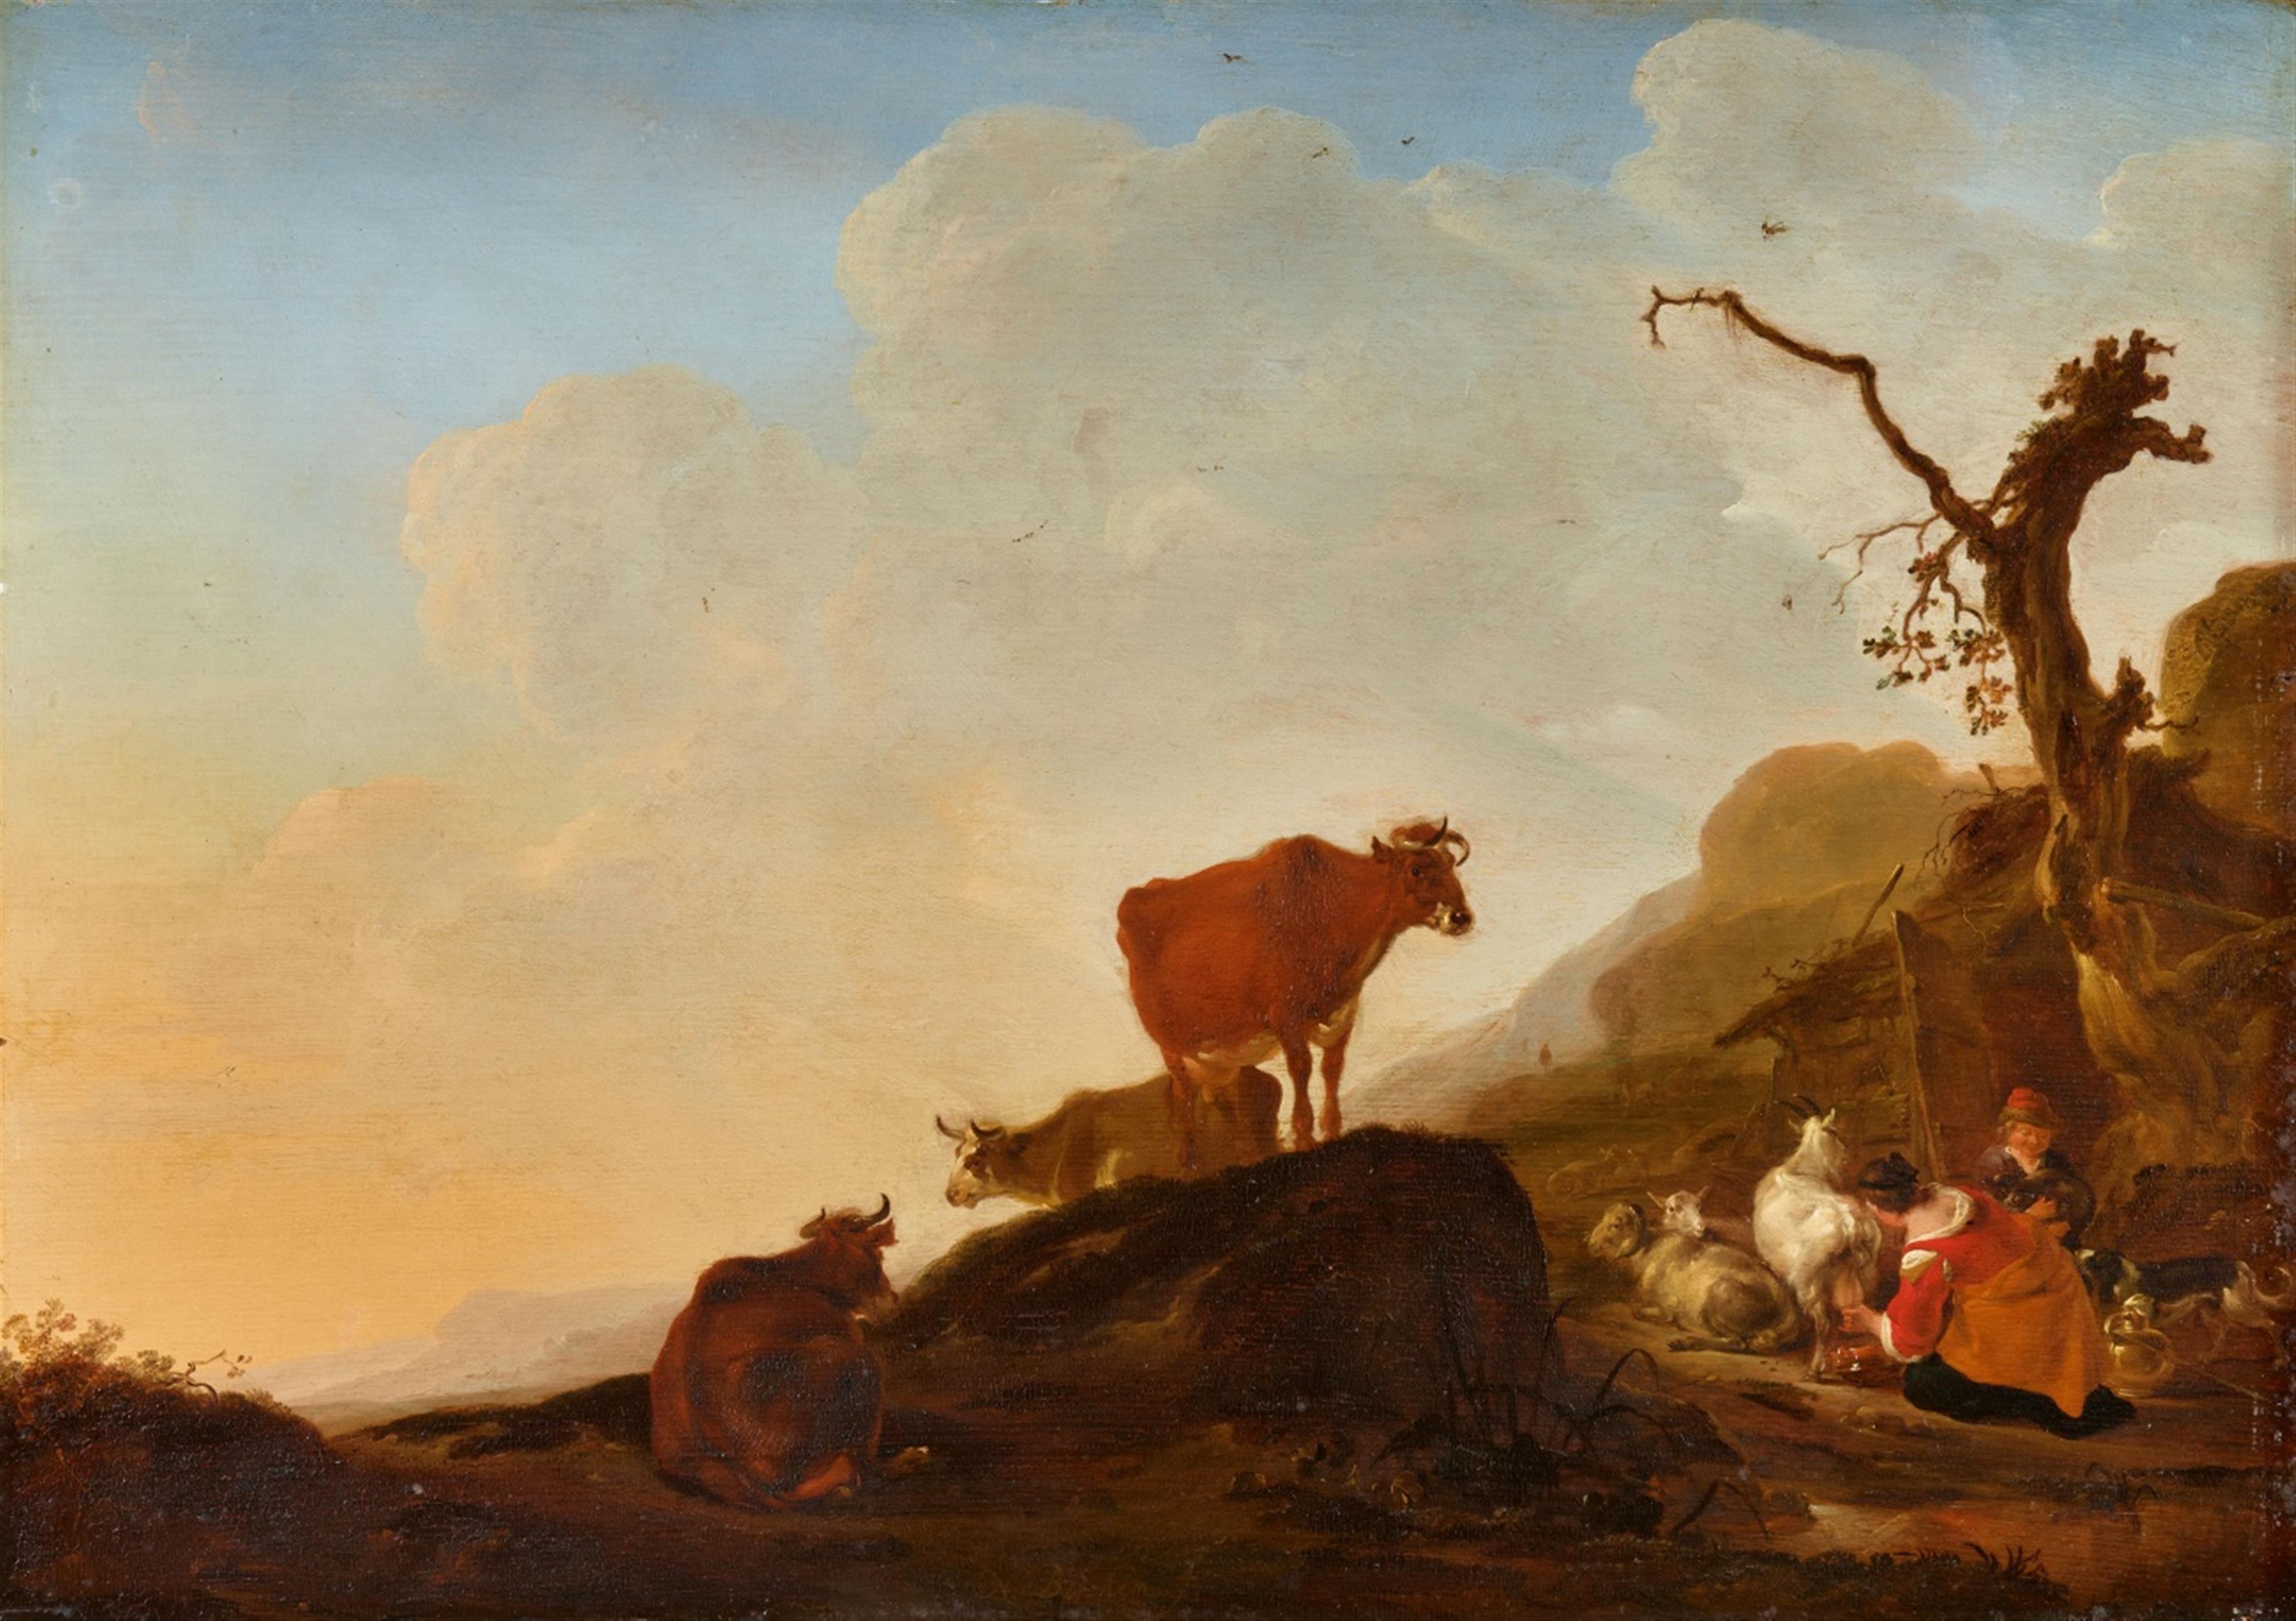 Nicolaes Berchem - Hilly Landscape with Cattle and Shepherds - image-1